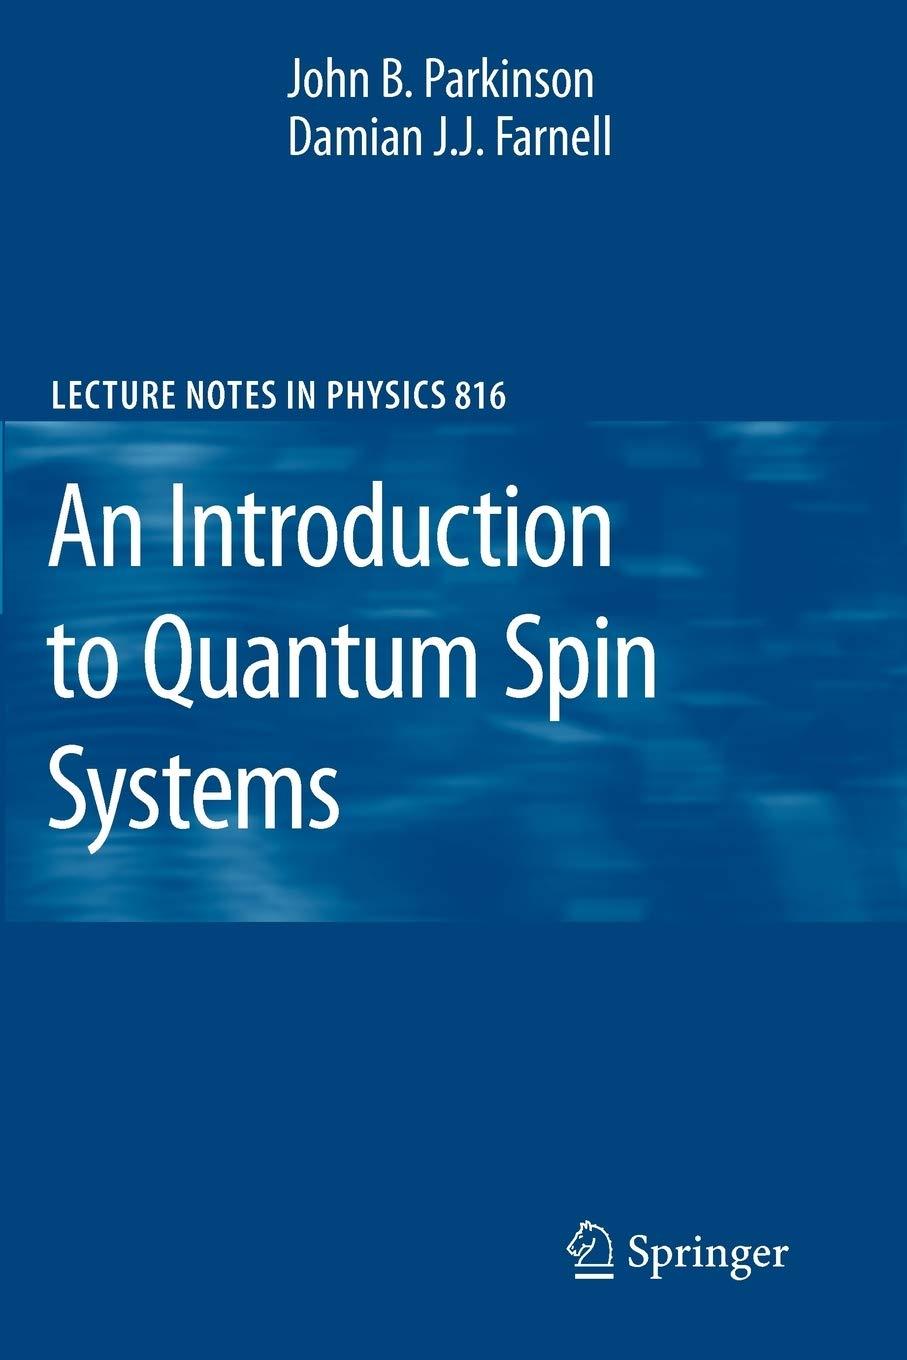 an introduction to quantum spin systems 1st edition john b. parkinson, damian j. j. farnell 3642132898,